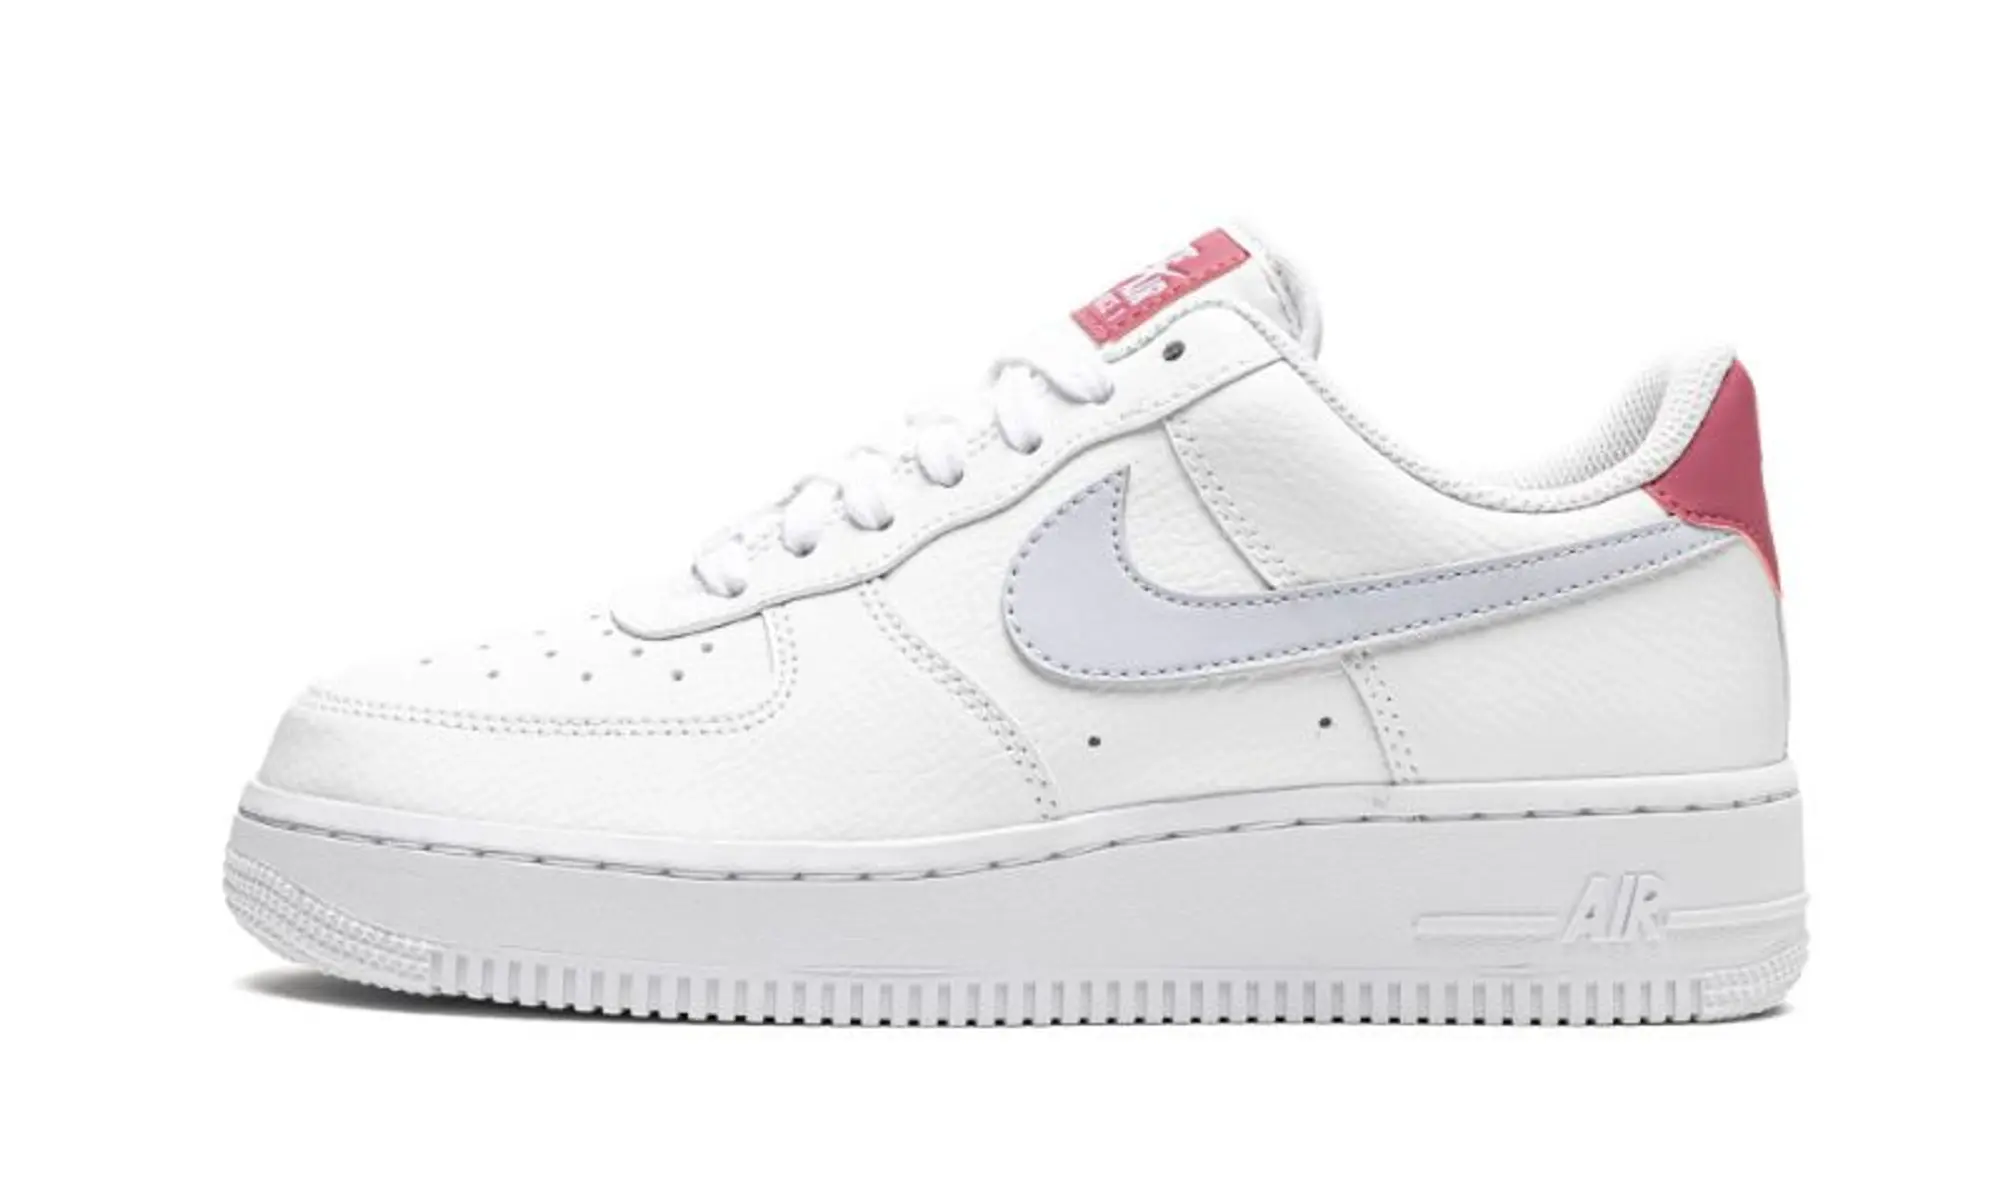 Nike Womens Air Force 1 '07 White / Desert Berry Shoes